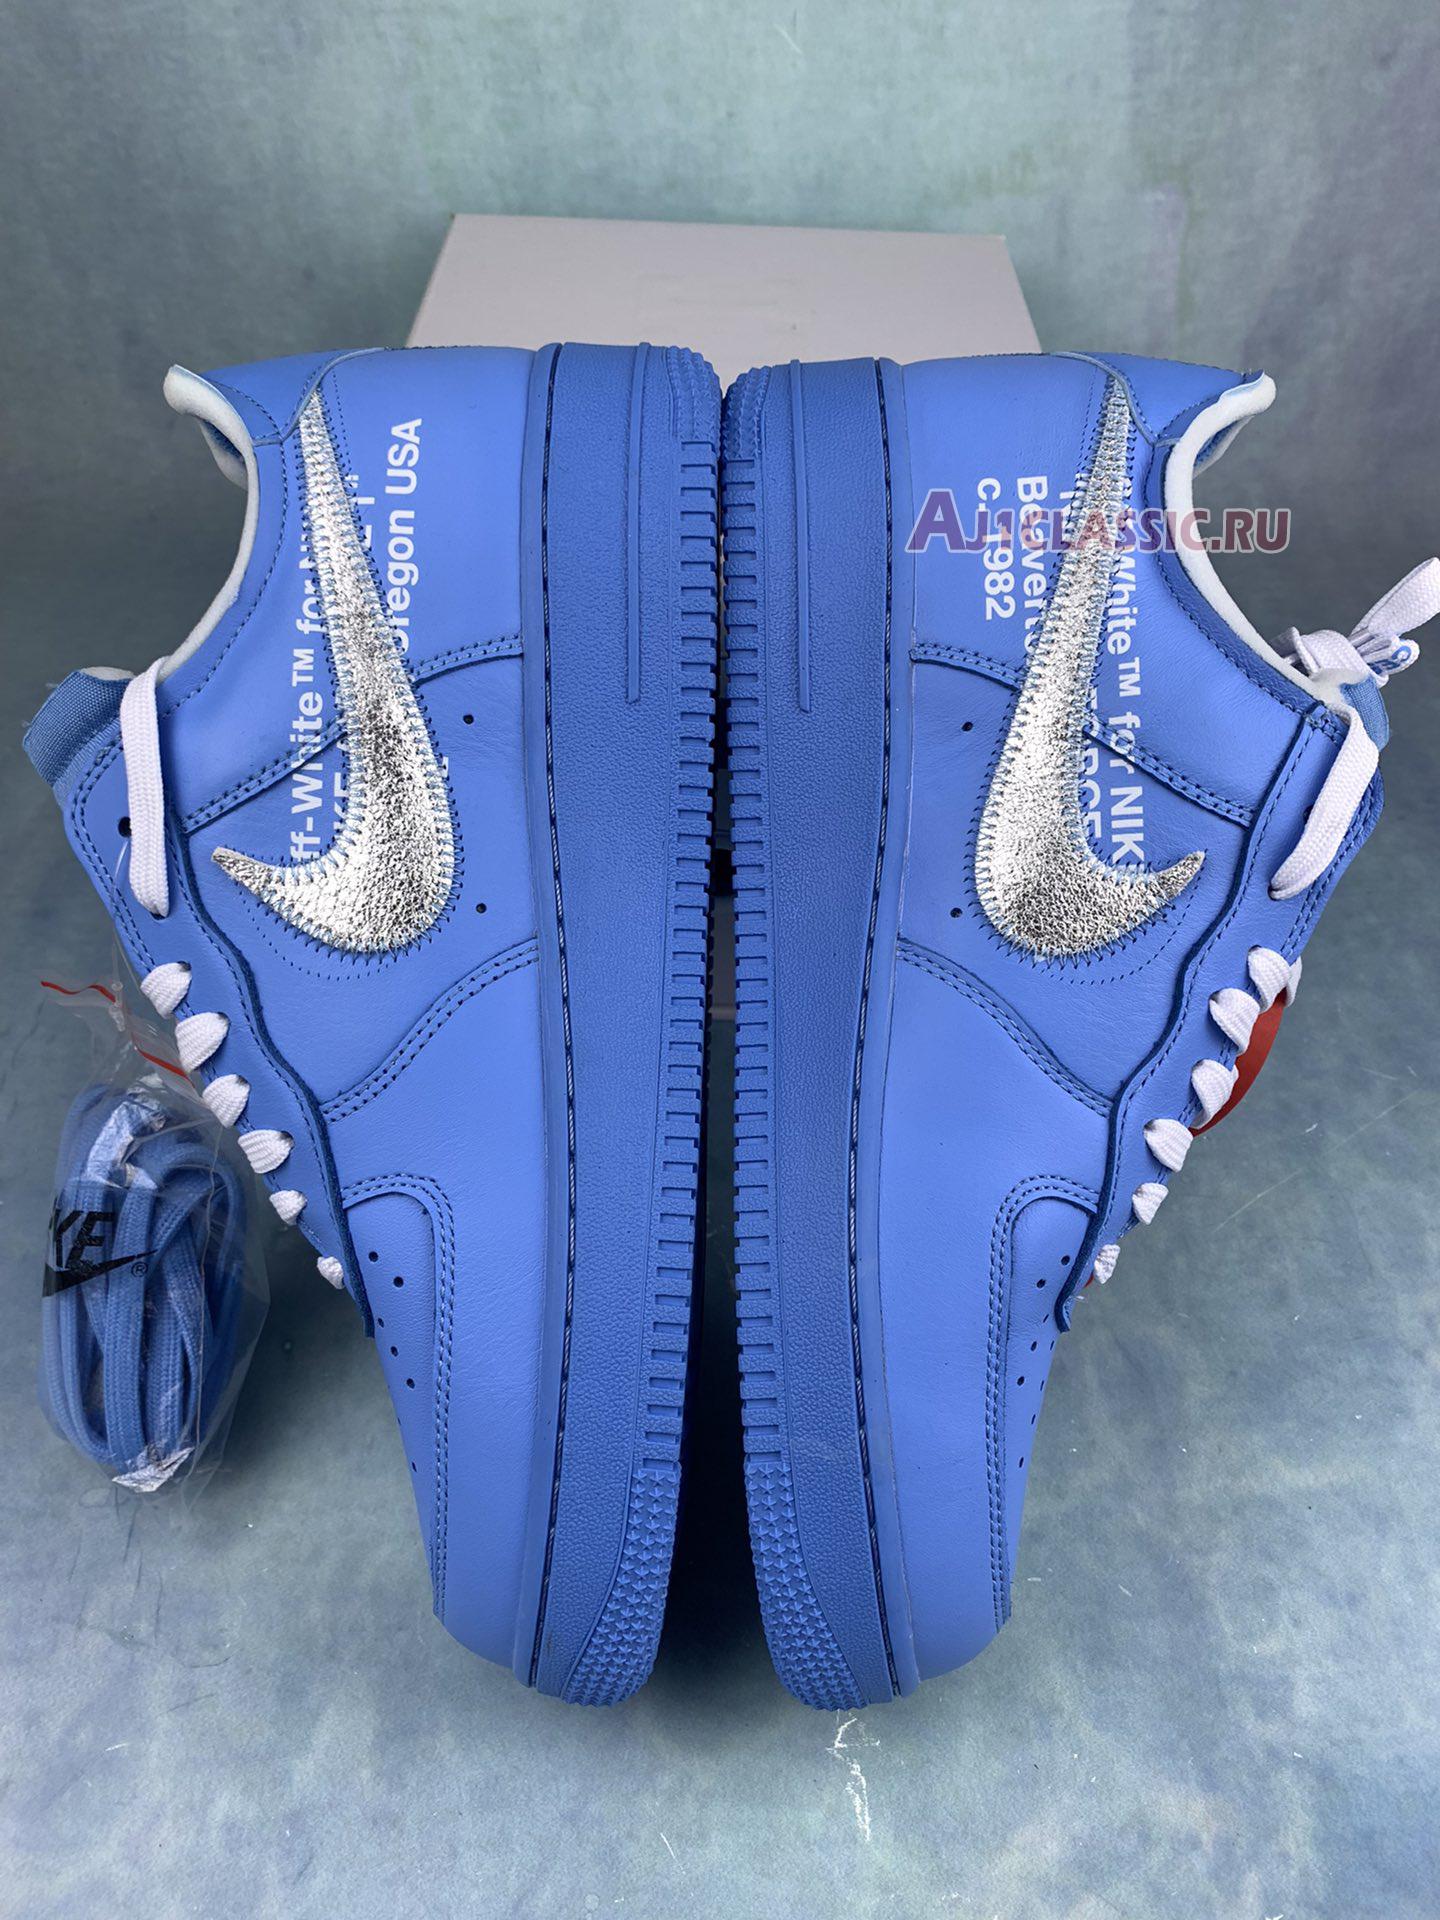 Off-White x Air Force 1 Low 07 "MCA" CI1173-400-2